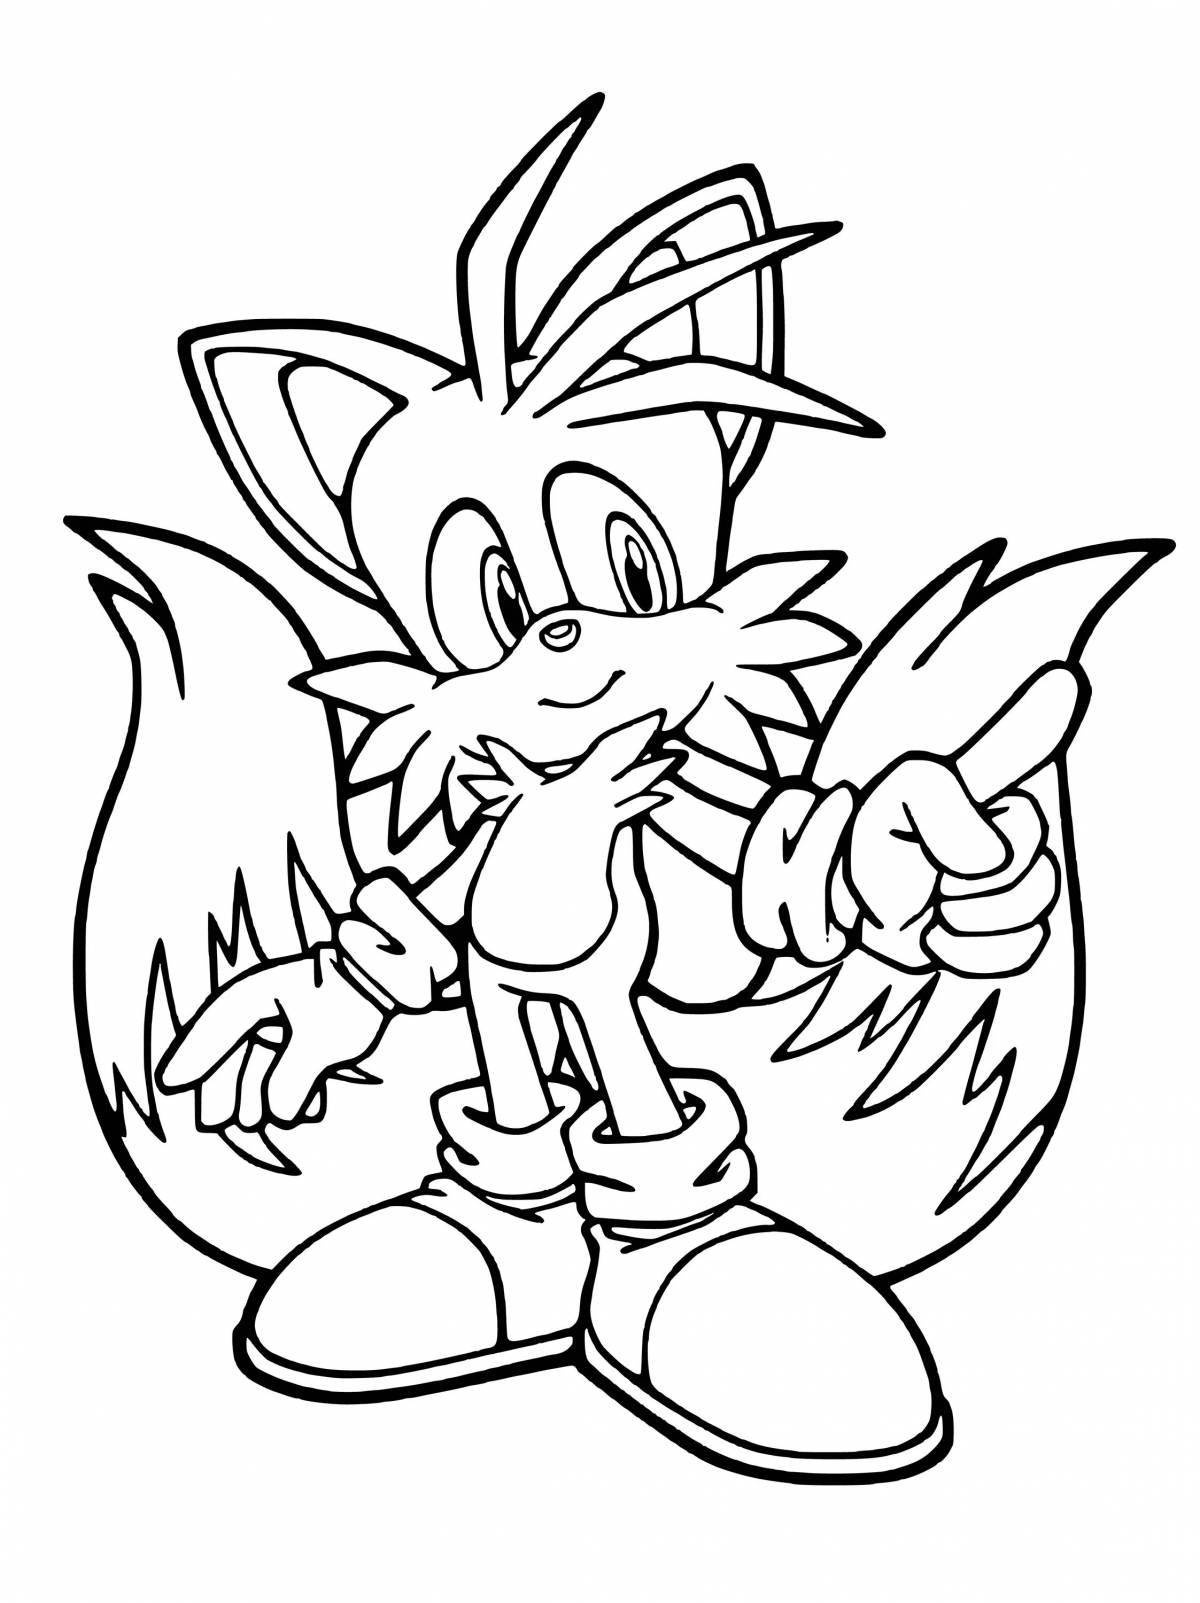 Cute sonic the hedgehog coloring book